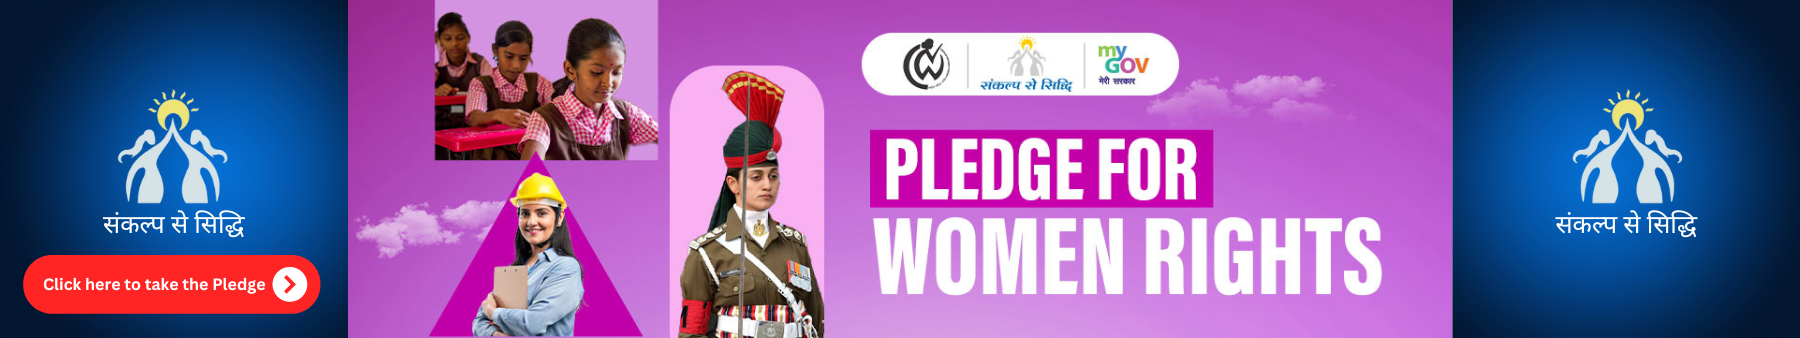 Pledge for Women Rights